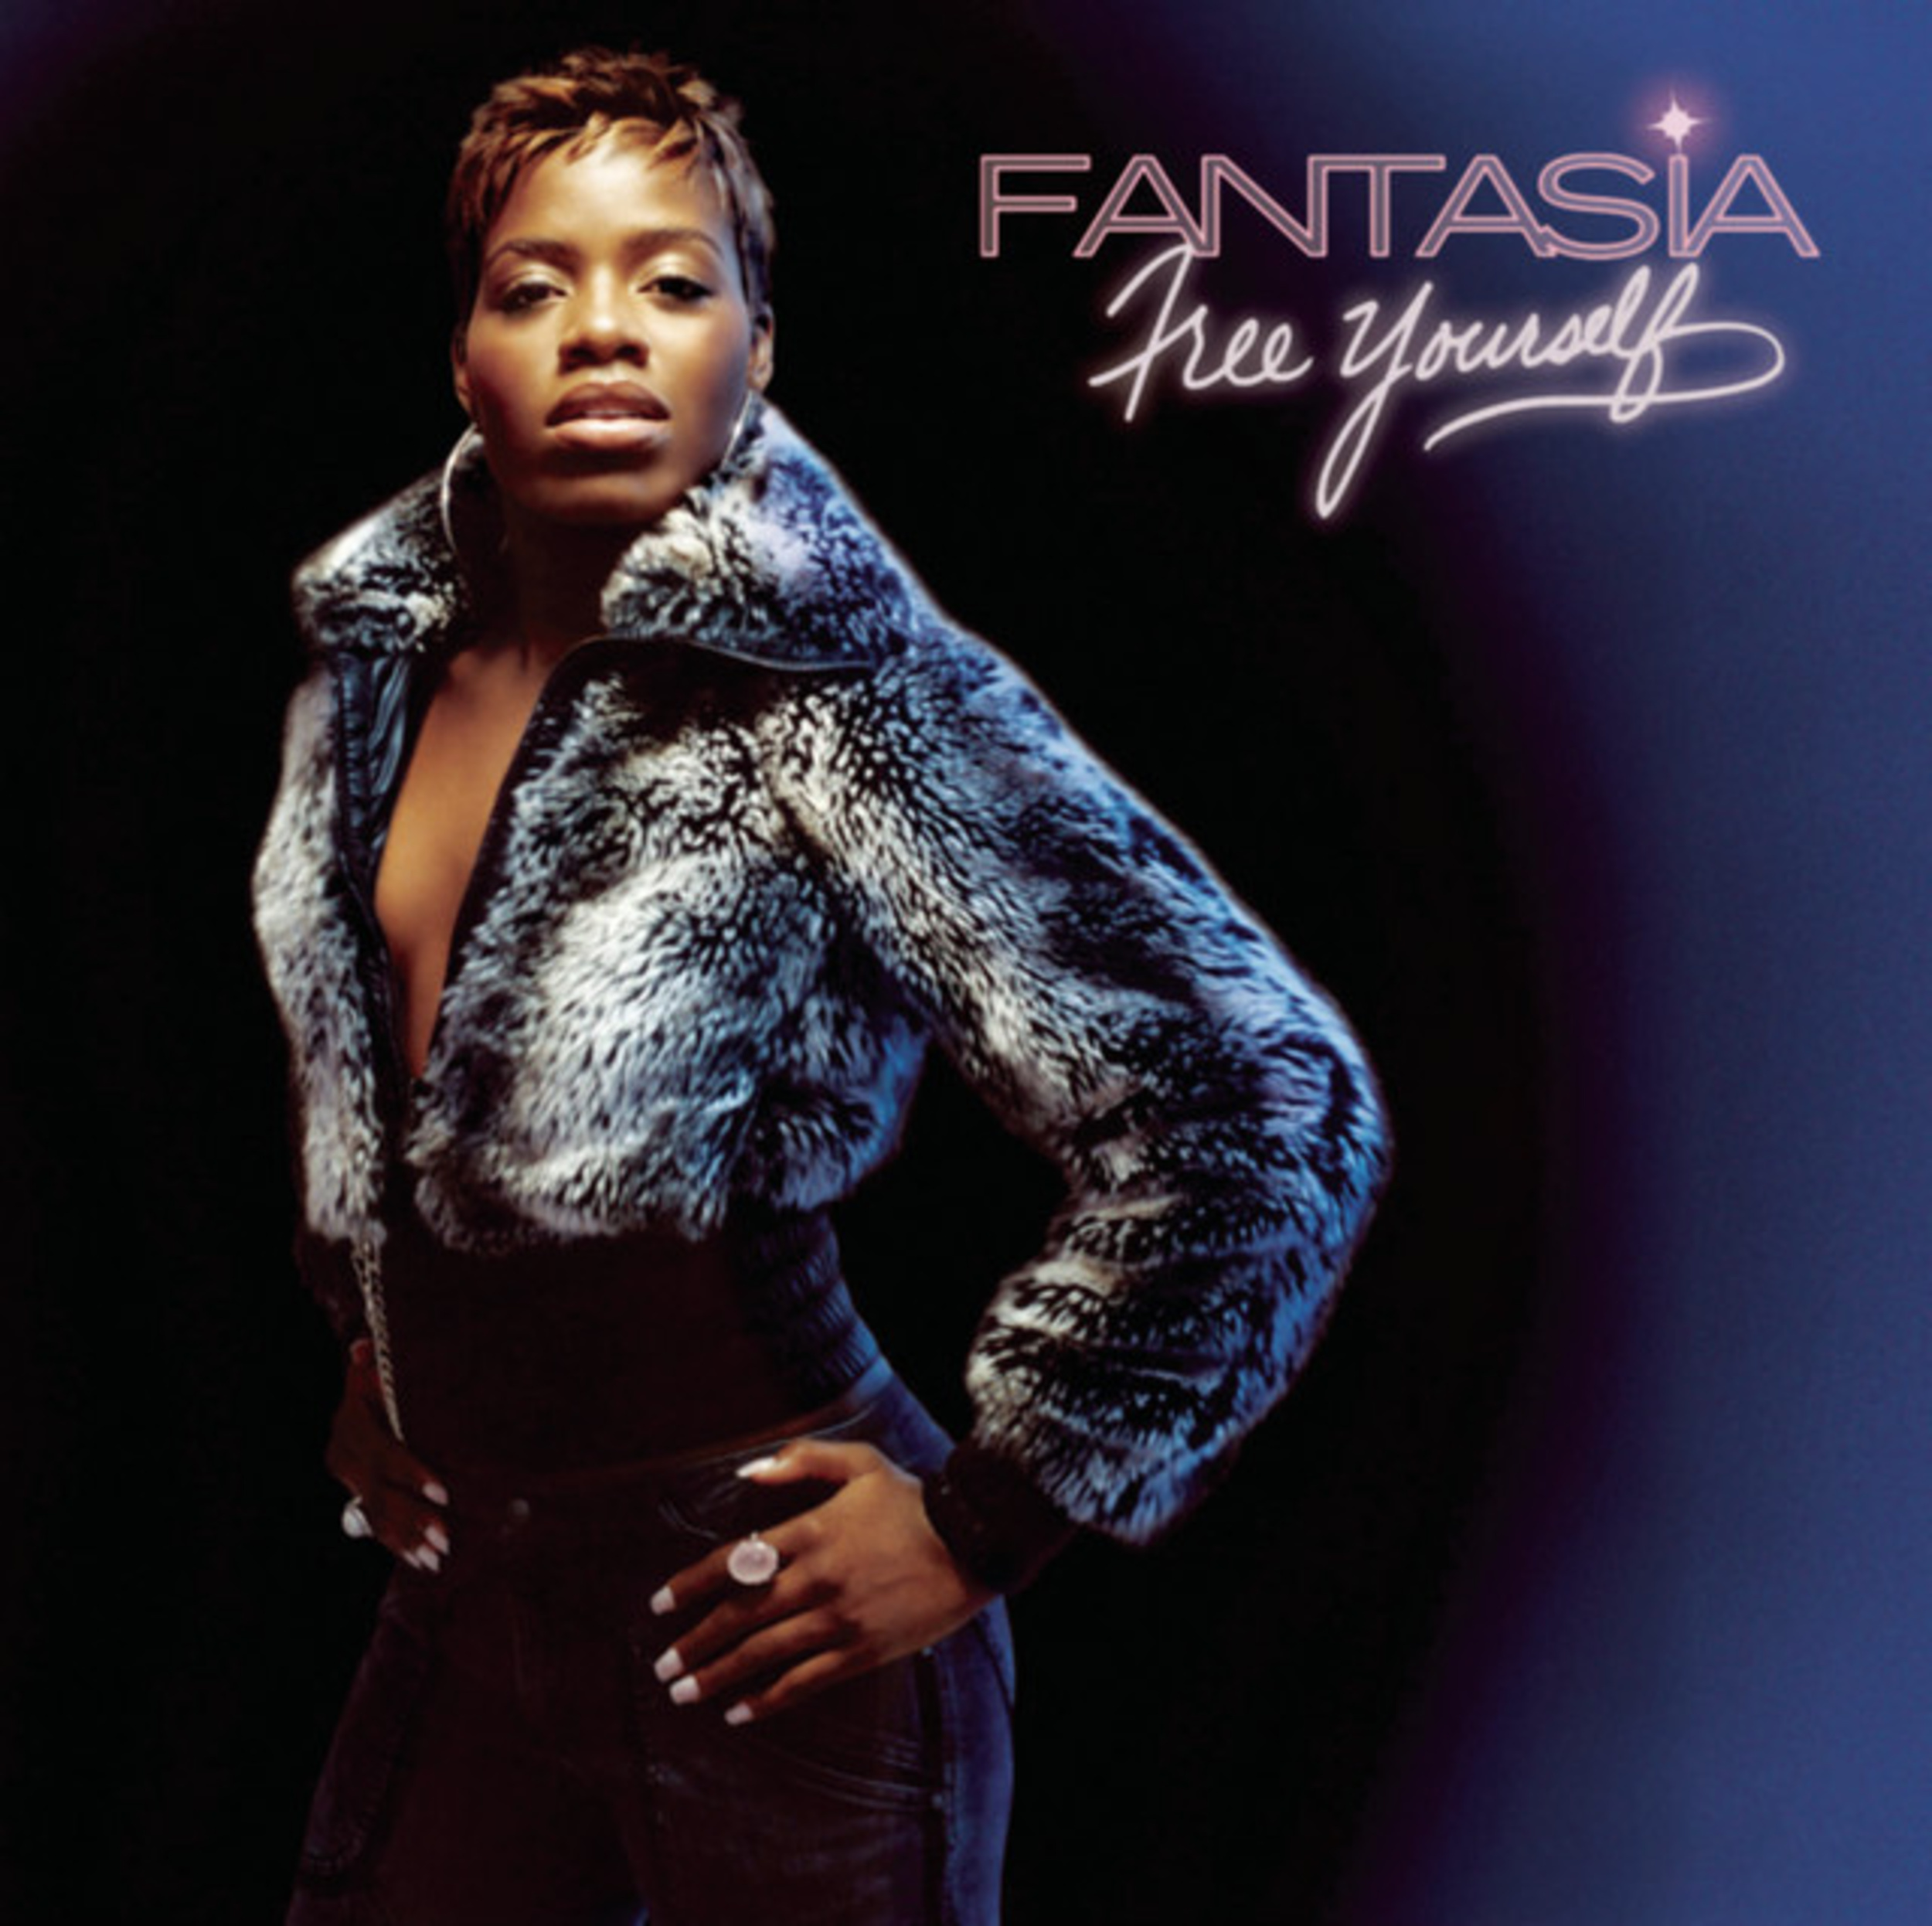 <p>After winning the third season of the singing competition show <em>American Idol,</em> Fantasia released her debut album, <em>Free Yourself.</em> She worked with some of R&B's most in-demand producers, such as Jermaine Dupri, Bryan-Michael Cox, The Underdogs, Missy Elliott, and Jazze Pha, to name a few. Fantasia knows how to counter the ups and downs of relationships on her singles like the album title track and <a href="https://www.youtube.com/watch?v=e265_NvKvRQ">"Truth Is." </a></p><p>You may also like: <a href='https://www.yardbarker.com/entertainment/articles/20_stupid_movies_that_are_actually_genius_012224/s1__39118382'>20 stupid movies that are actually genius</a></p>